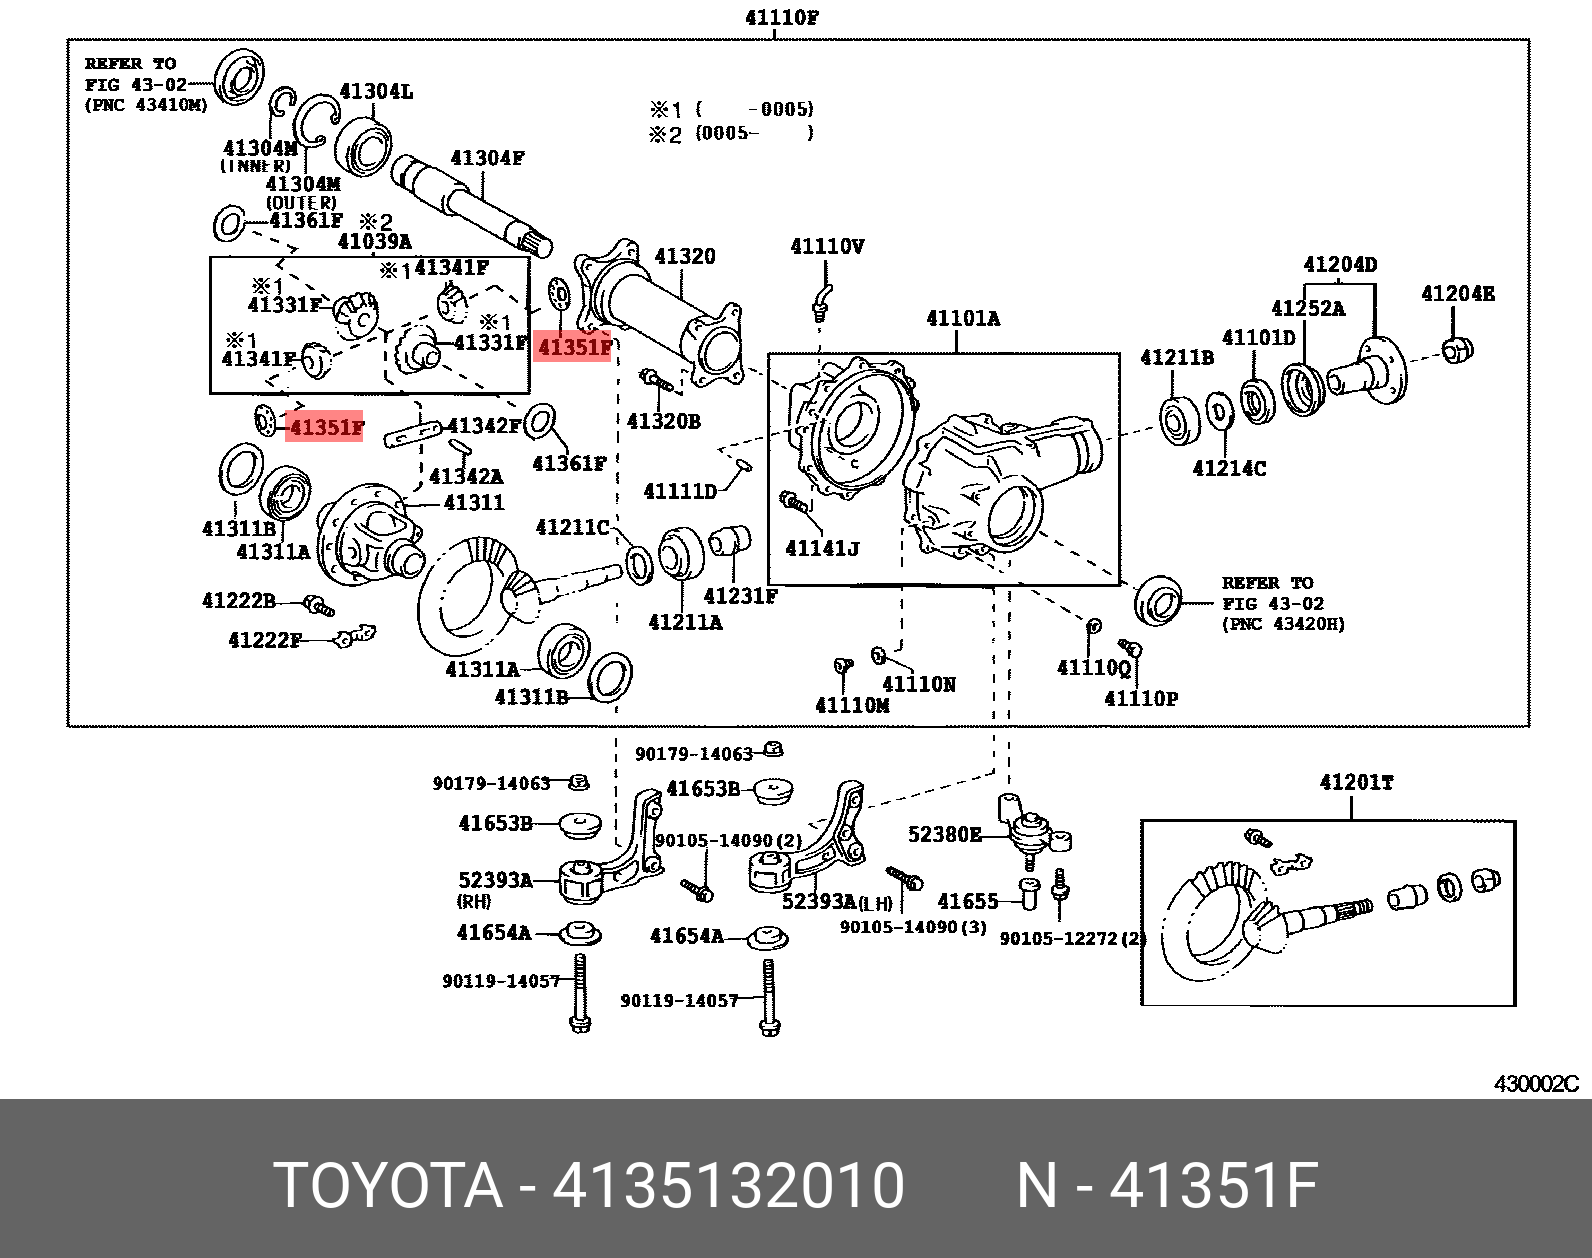 4135132010, YARIS 202002-, KSP210, MXPA1#, MXPH1#, WASHER, FRONT DIFFERENTIAL PINION THRUST